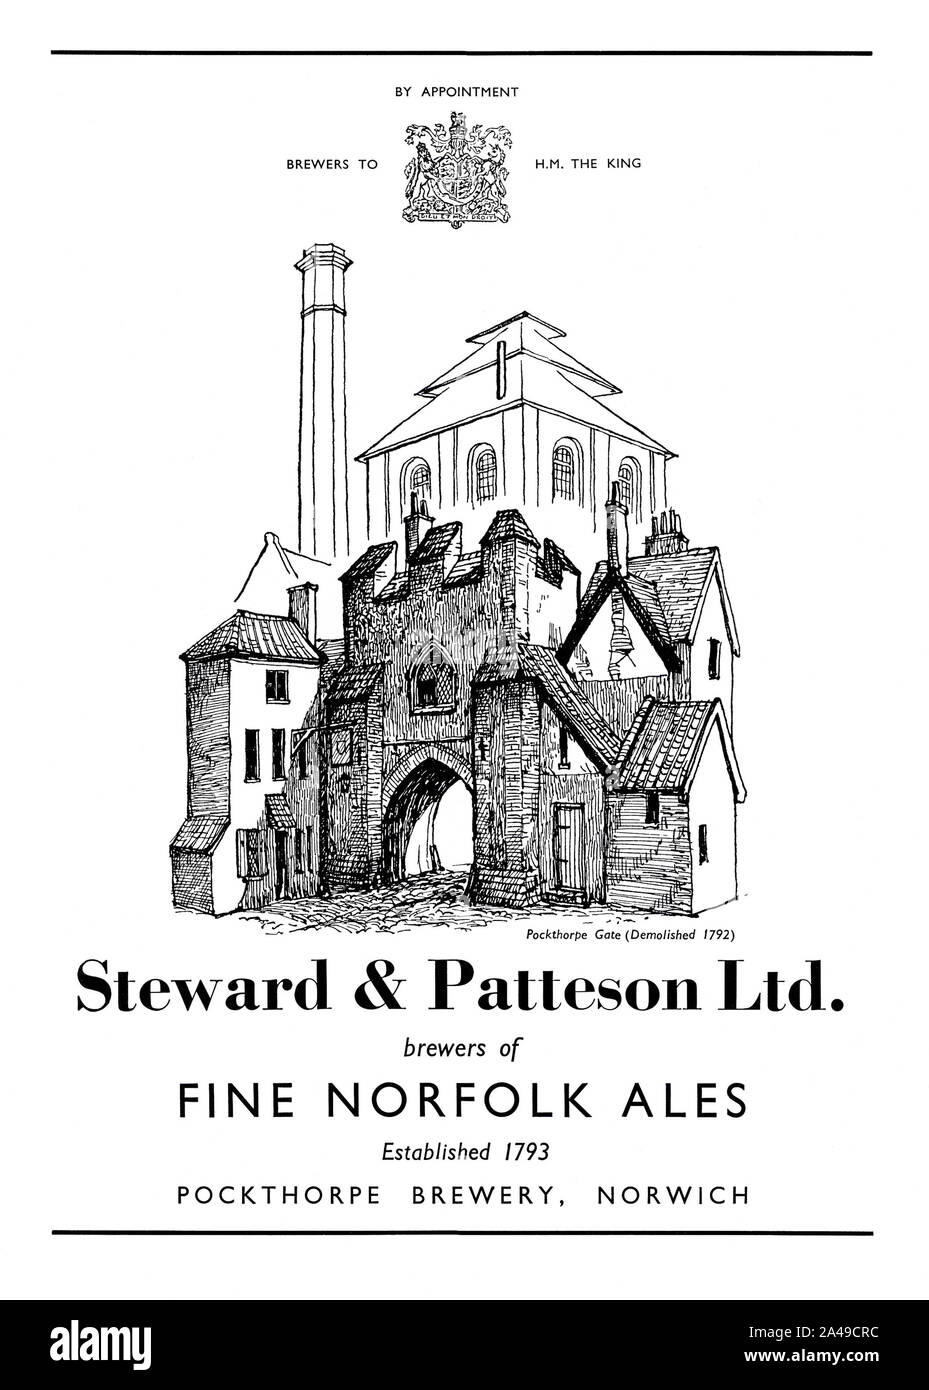 Advert for Steward and Patteson beers, 1951. The illustration shows the Pockthorpe Brewery in Norwich. The S&P company was founded in 1793. The company flourished well into the 20th Century. In 1961, it was described as one of the largest non-metropolitan breweries in the country. In 1961, along with Bullards, S&P bought the Morgans’ brewery. As part of the deal Watney’s undertook to supply the Bullards’ and Steward & Patteson tied houses with keg beers like ‘Red Barrel’. in 1967 Watney’s completed the purchase of the company. In 1970 the last brew was made at the Pockthorpe Brewery. Stock Photo